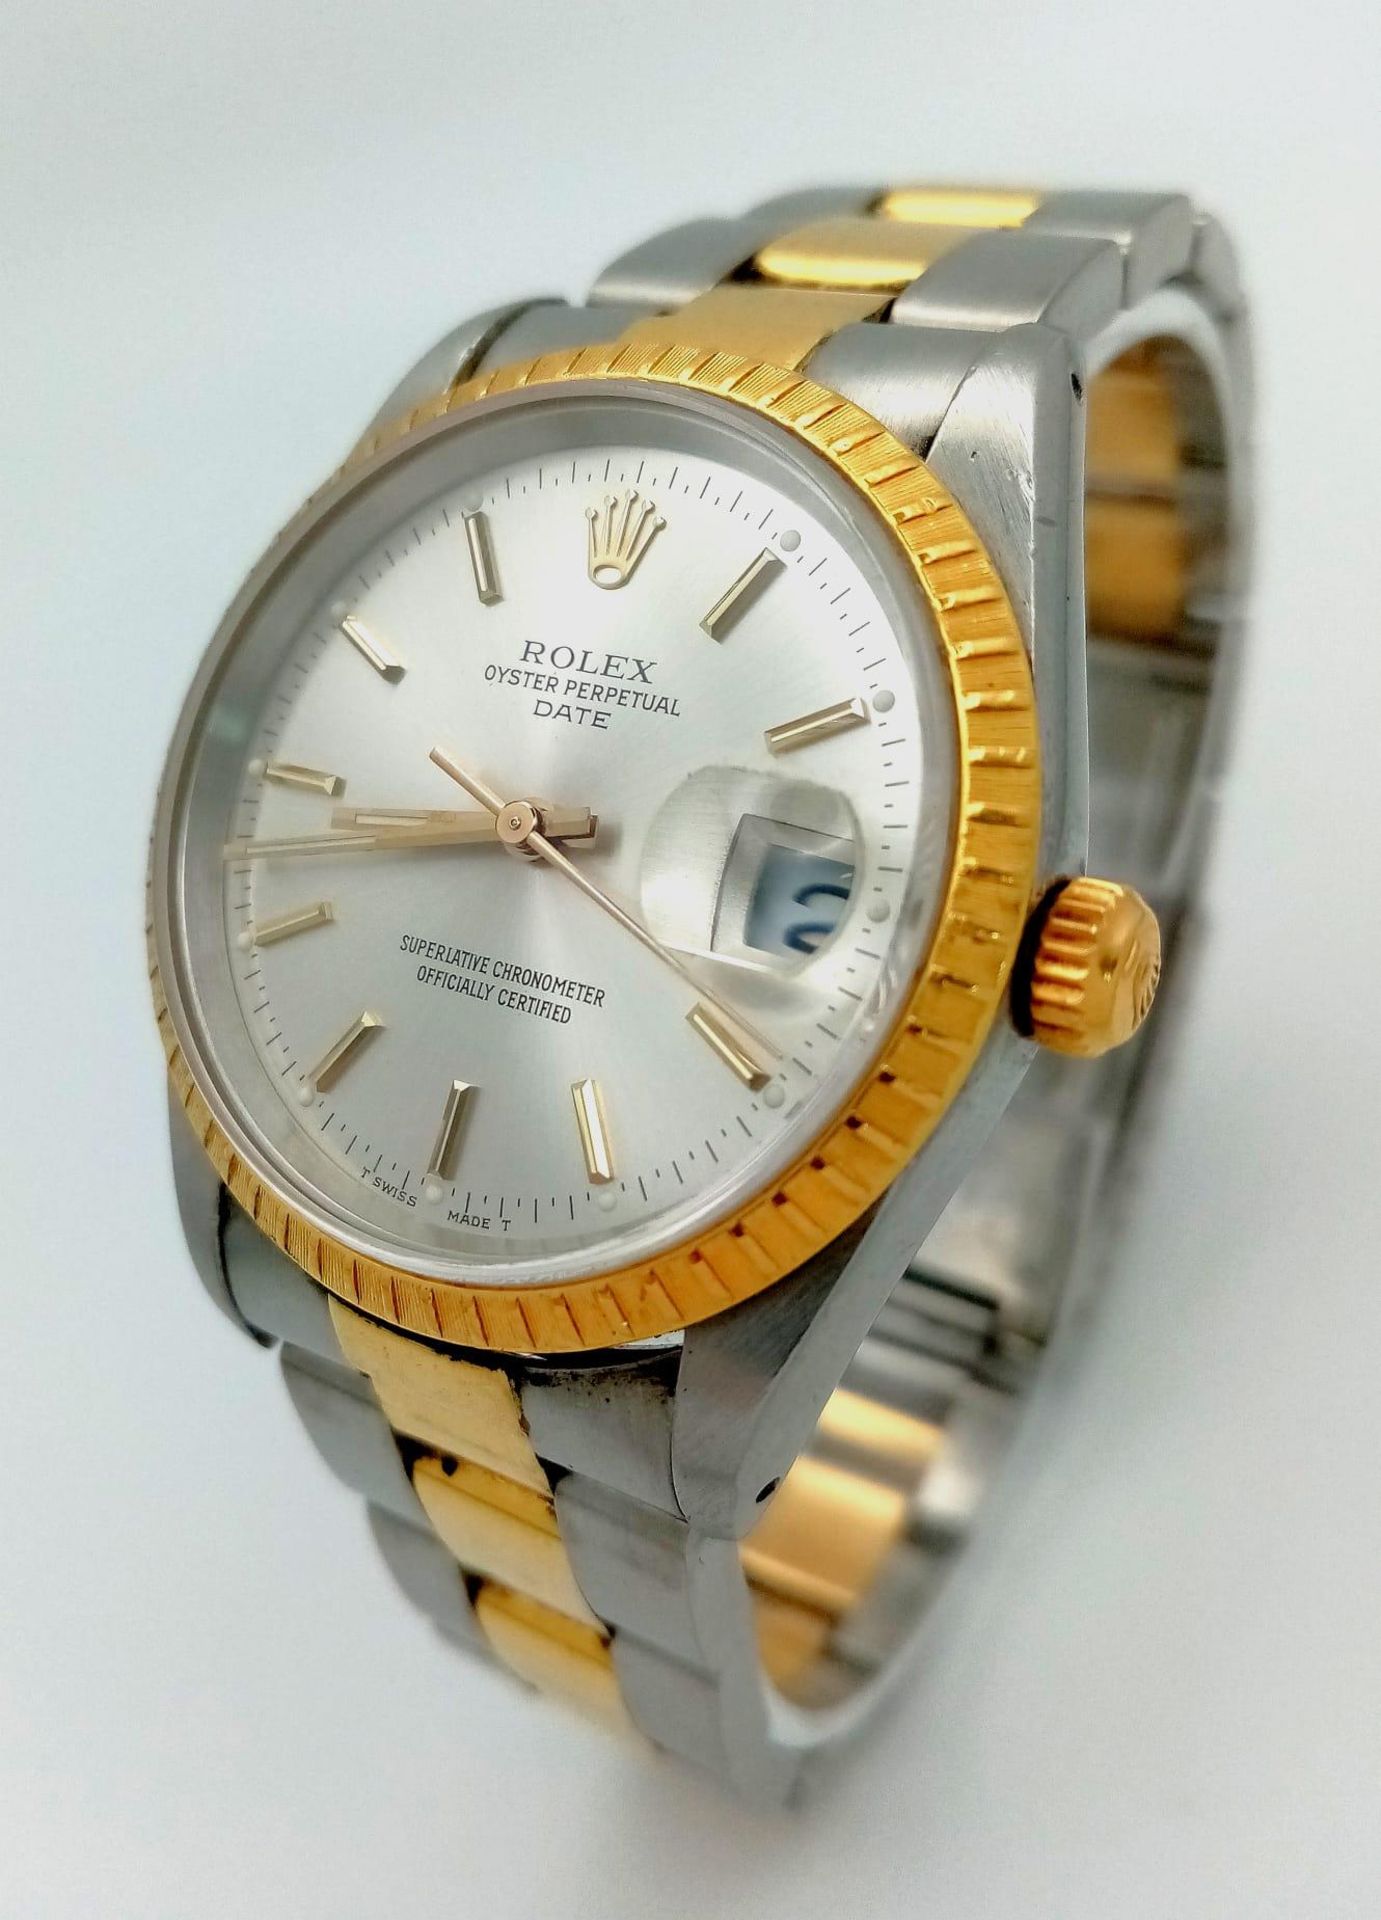 THE CLASSIC ROLEX OYSTER PERPETUAL DATE AUTOMATIC BI-METAL GENTS WATCH WITH TASTEFUL SILVERTONE DIAL - Image 3 of 19